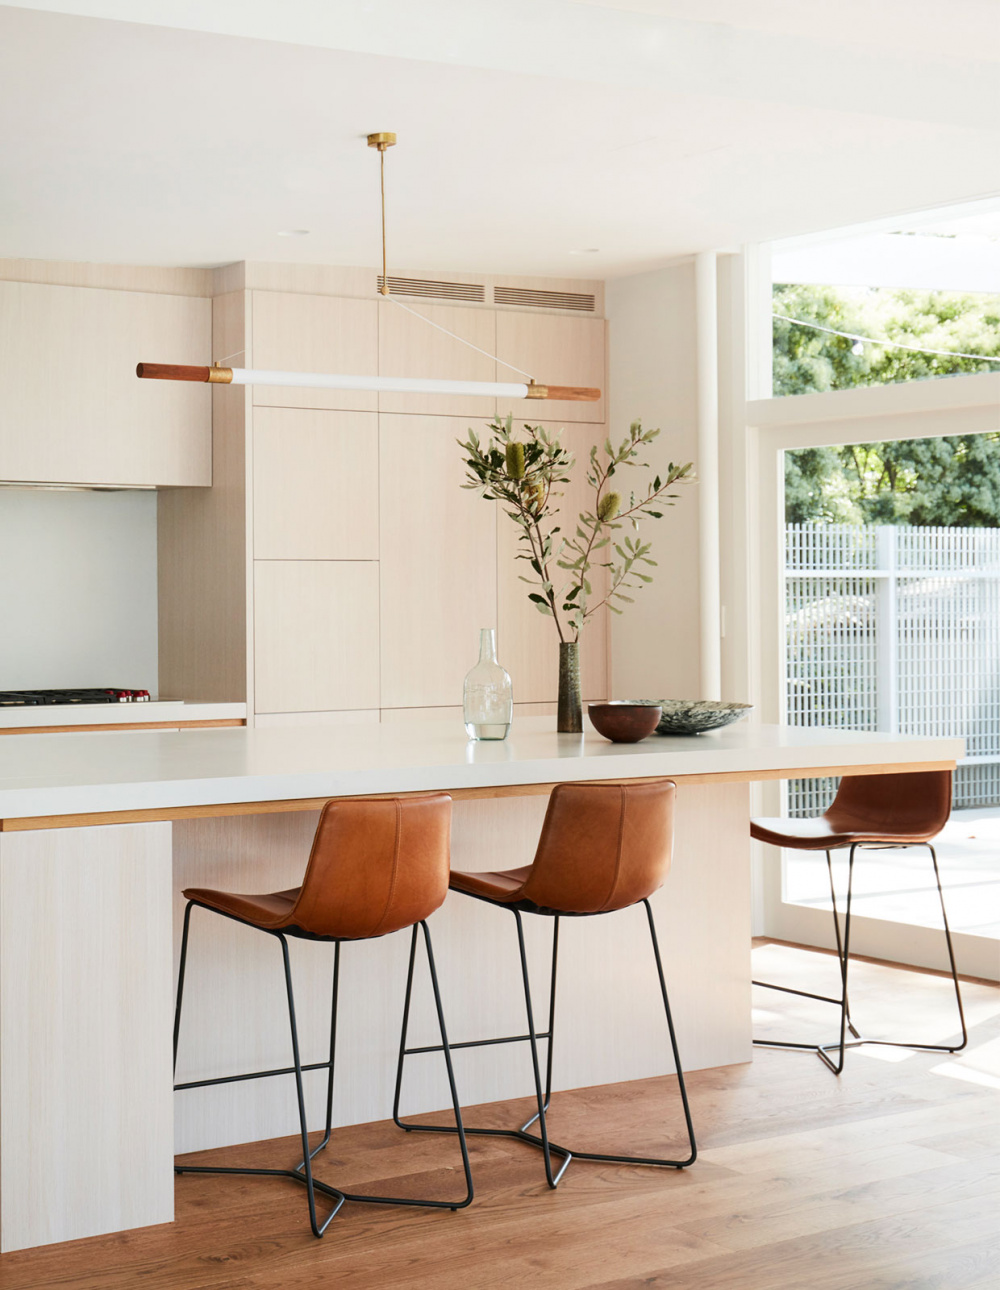 An Amazing Mid-Century Home Gets A High-Tech Makeover!